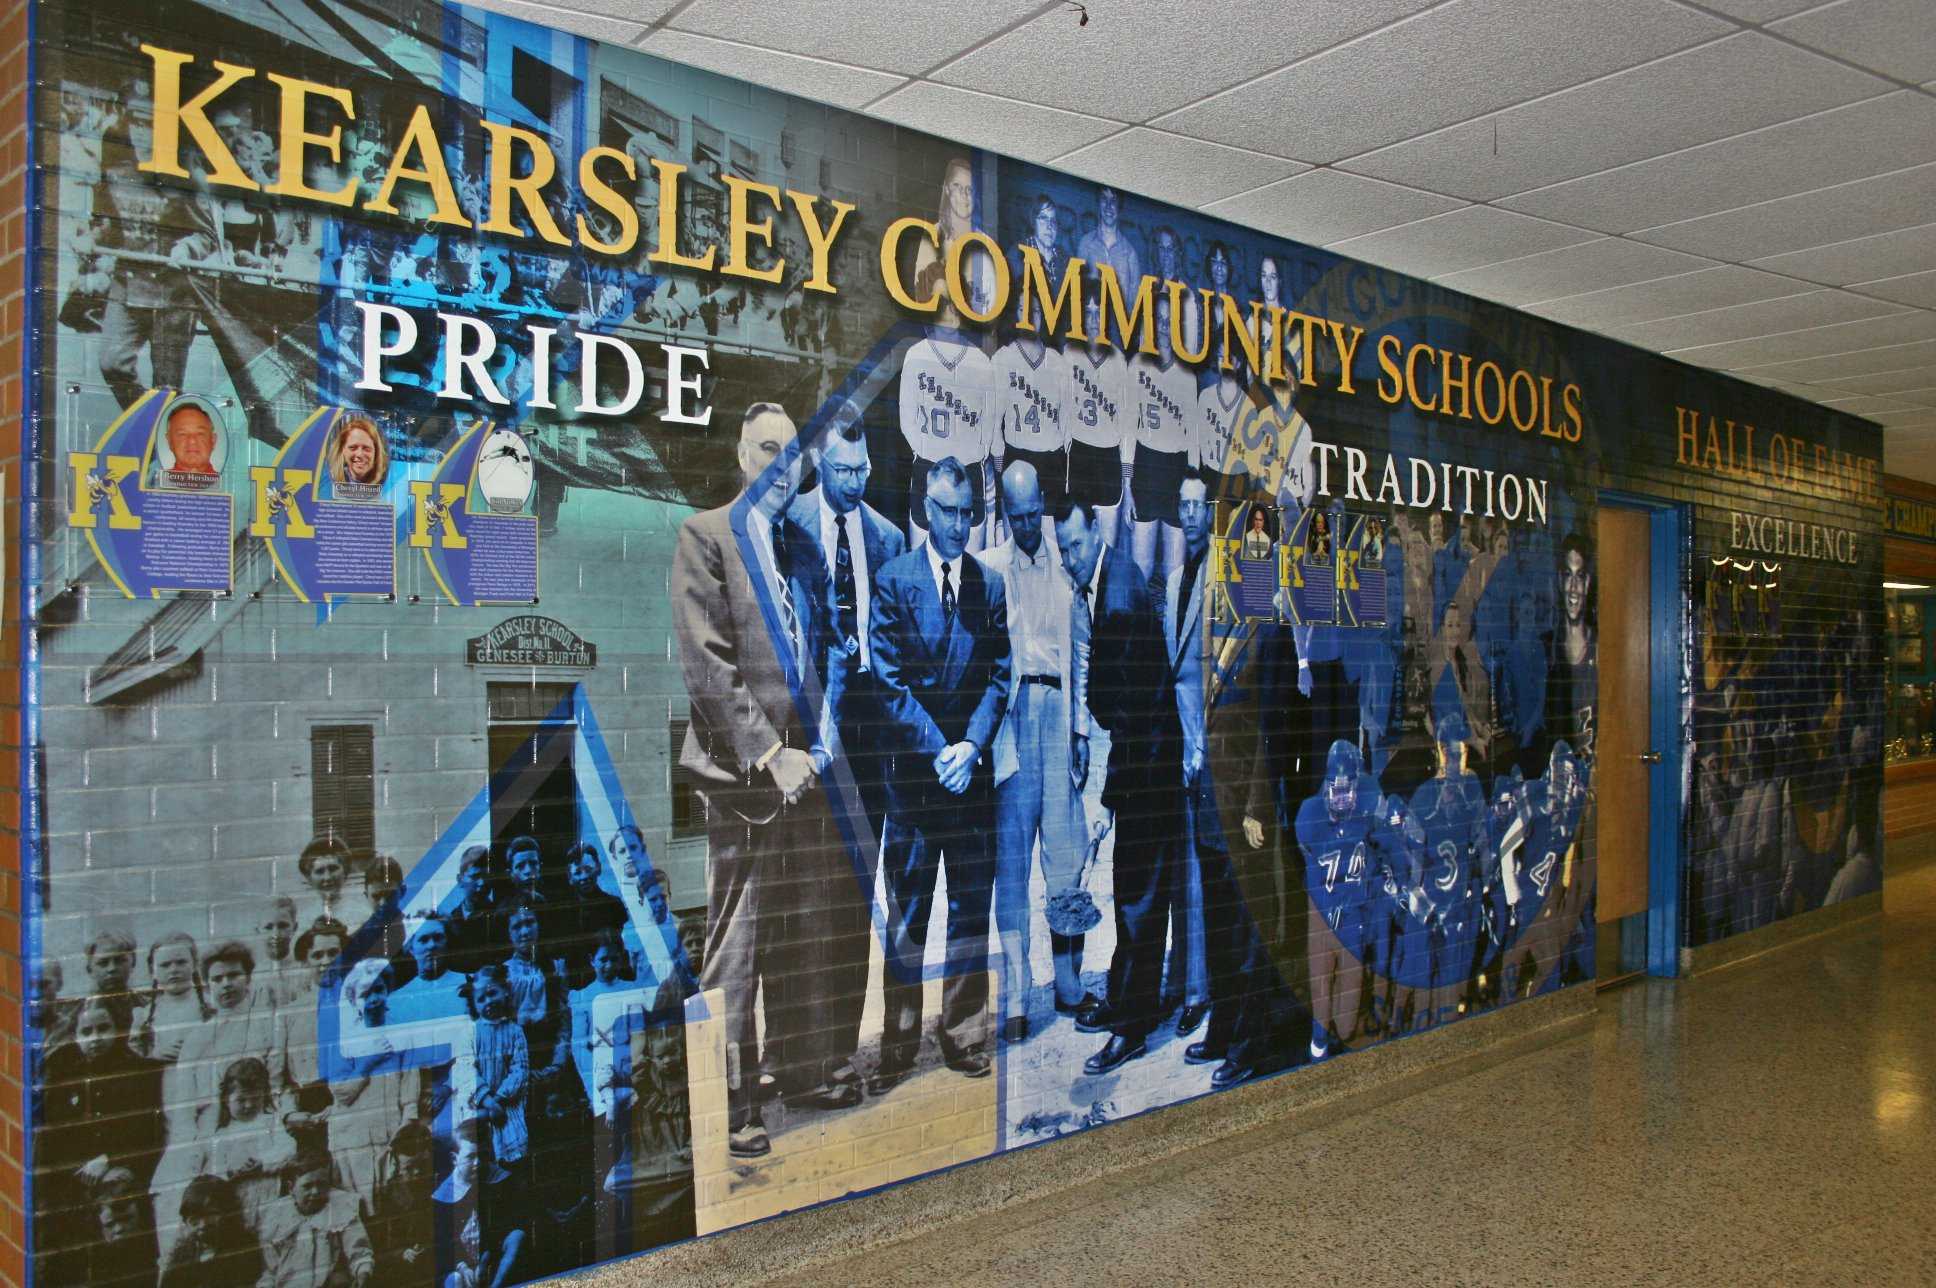 The Hall of Fame mural shows off its three components: pride, tradition, and excellence. This mural was replaced on April 14. The photographer was standing outside the northwest corner of the gym.